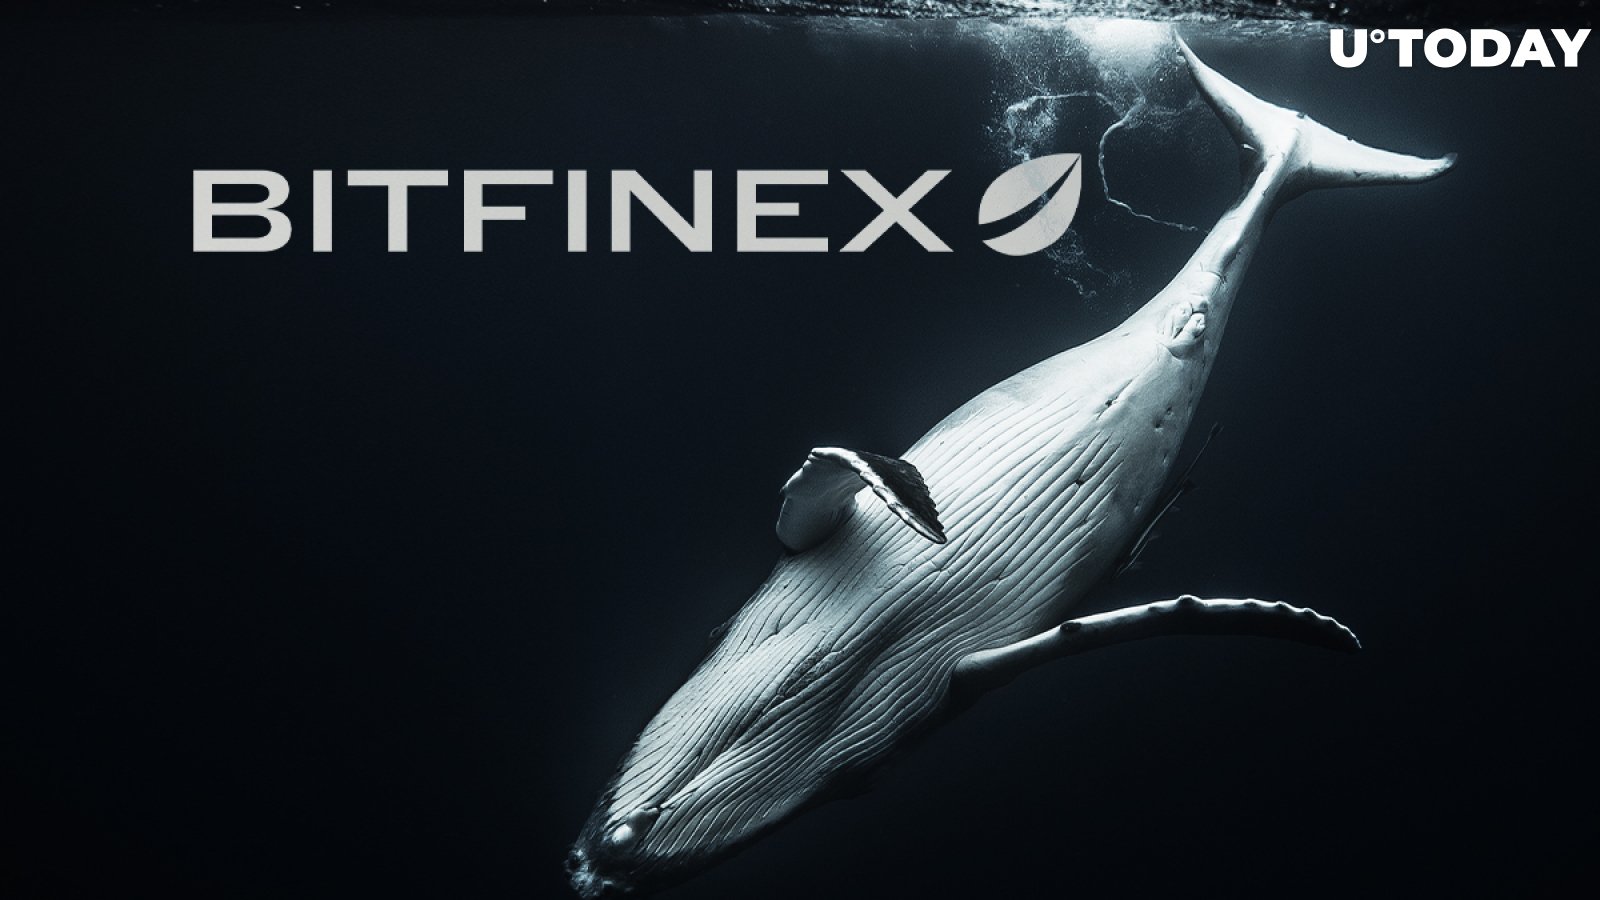 Famous Bitfinex Whale Leaves Crypto Twitter. Read His Farewell Message